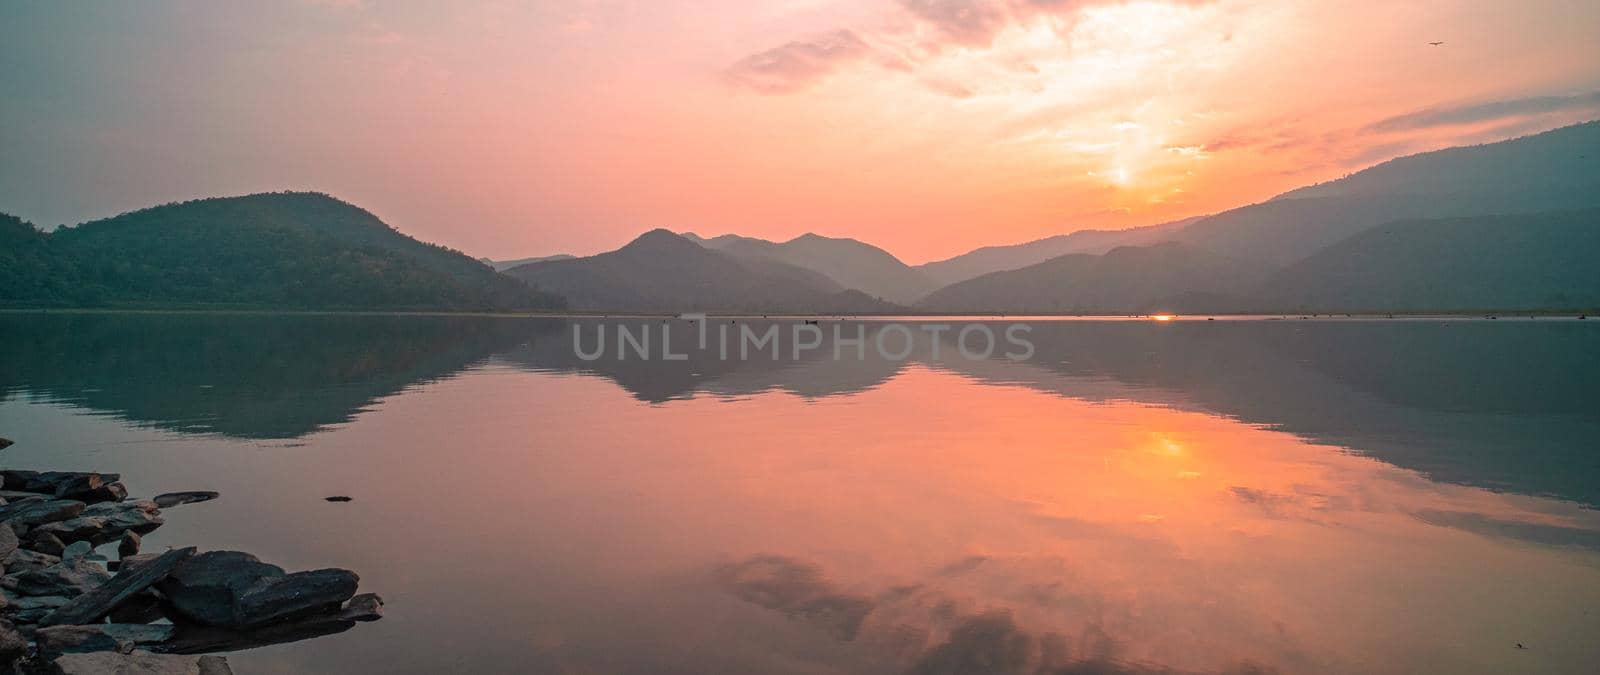 Panorama scenic of mountain lake with perfect reflection at sunrise. beautiful mountain range landscape with pink pastel sky with hills on background and reflected in water. Nature lake landscape by Petrichor